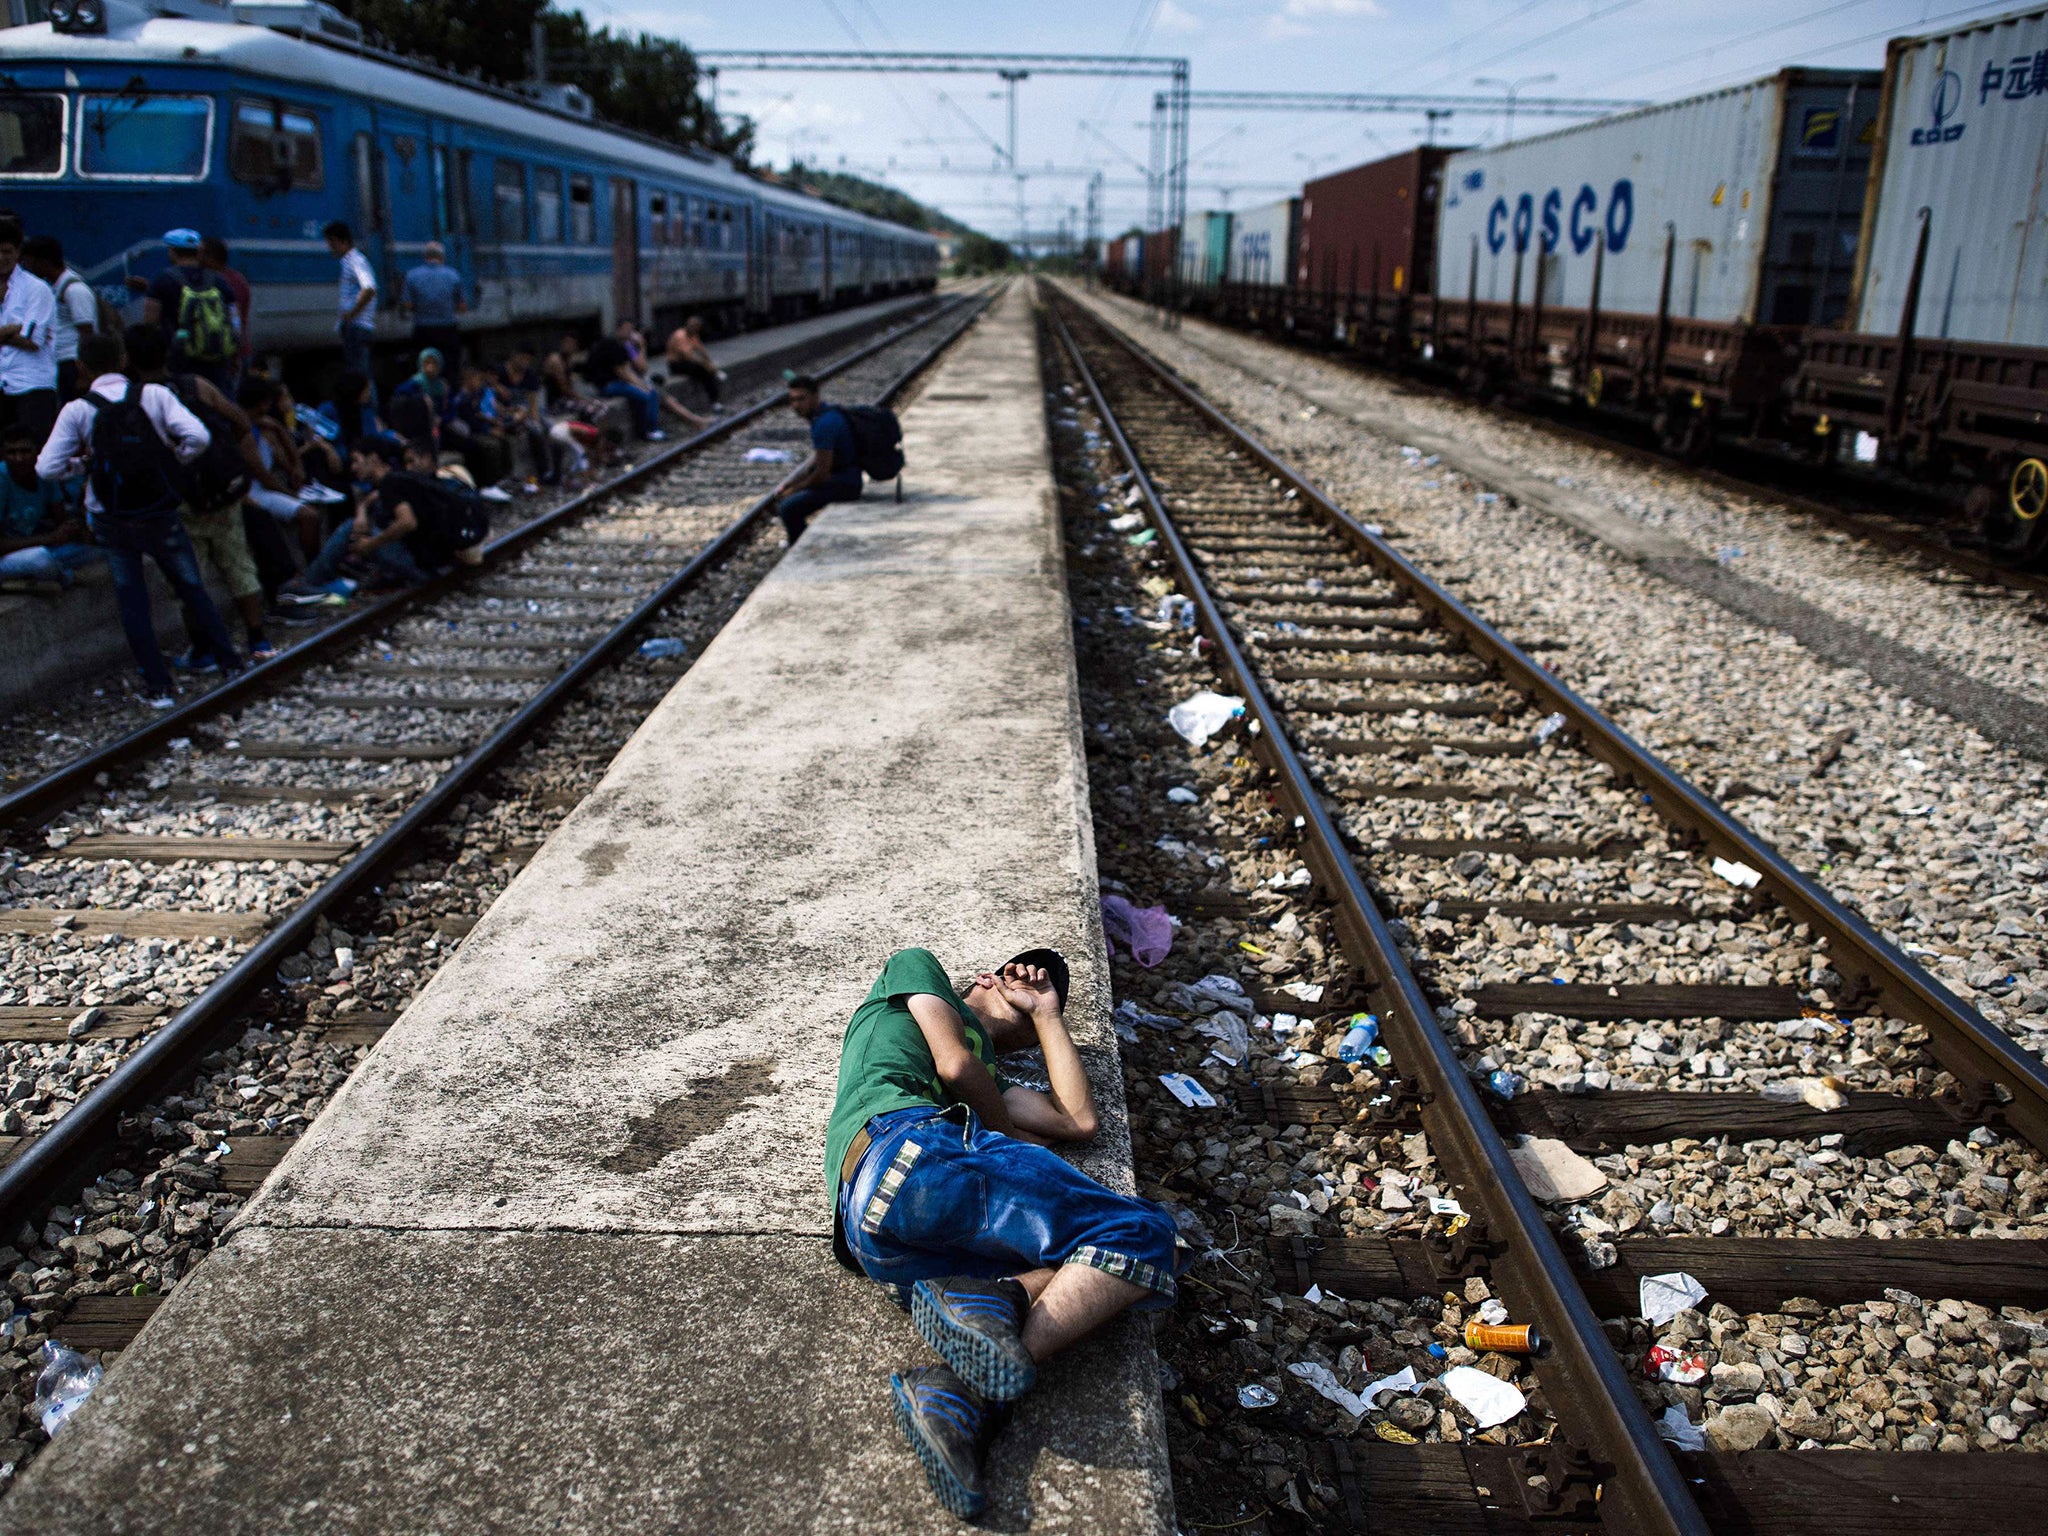 A migrant man rests on a platform at the train station in Gevgelija, on the Macedonian-Greek border